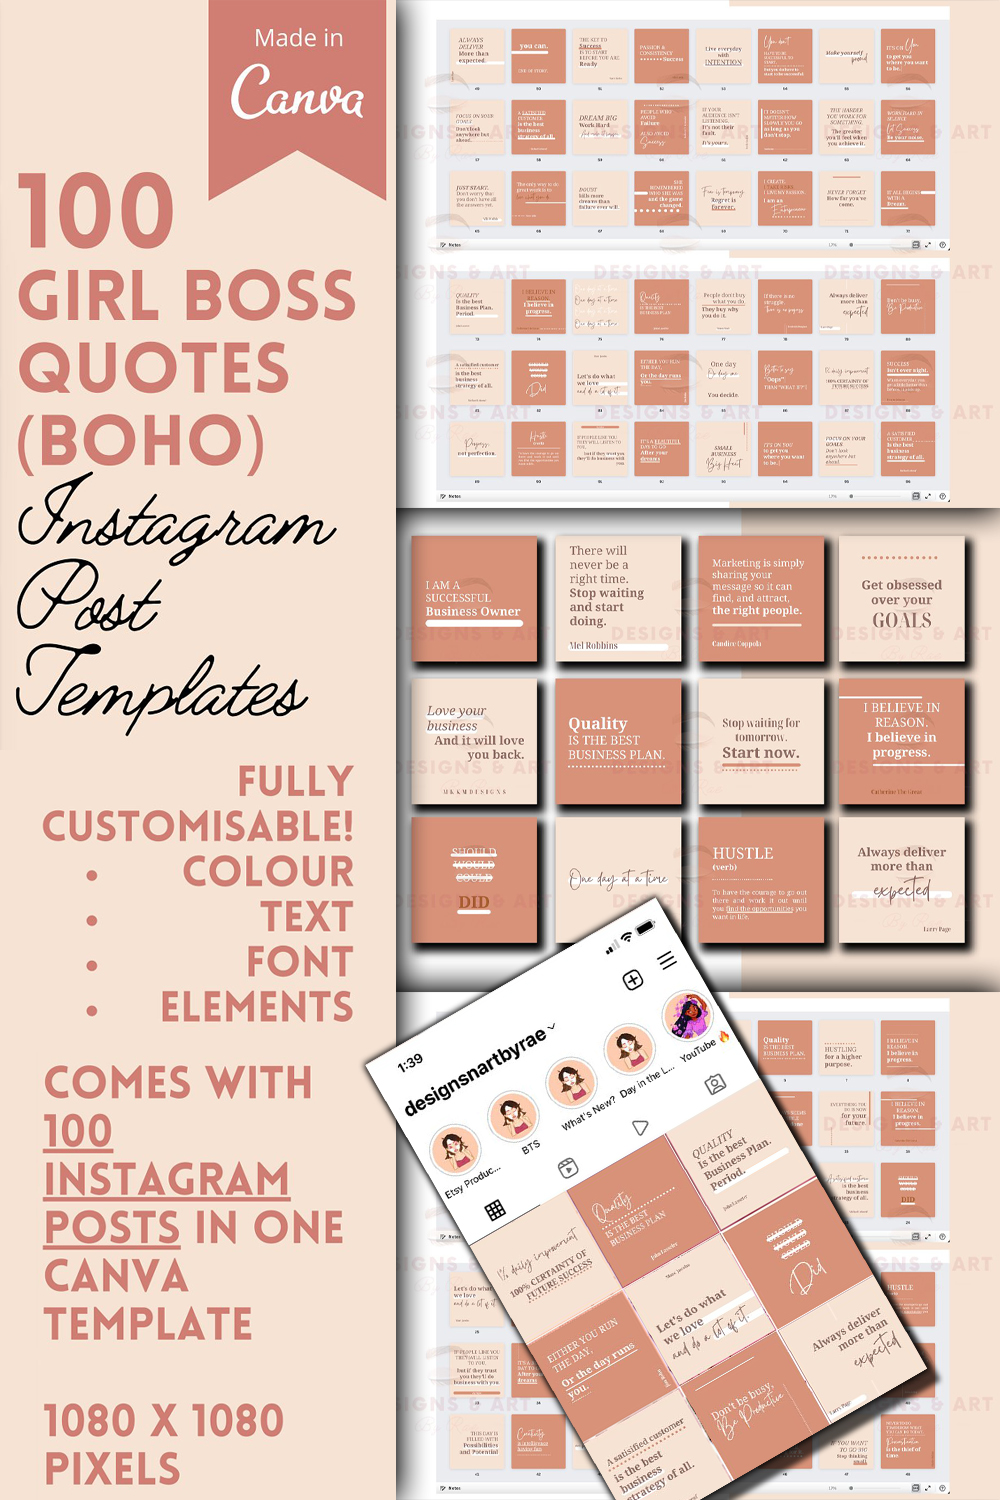 Boho instagram quotes template of pinterest.